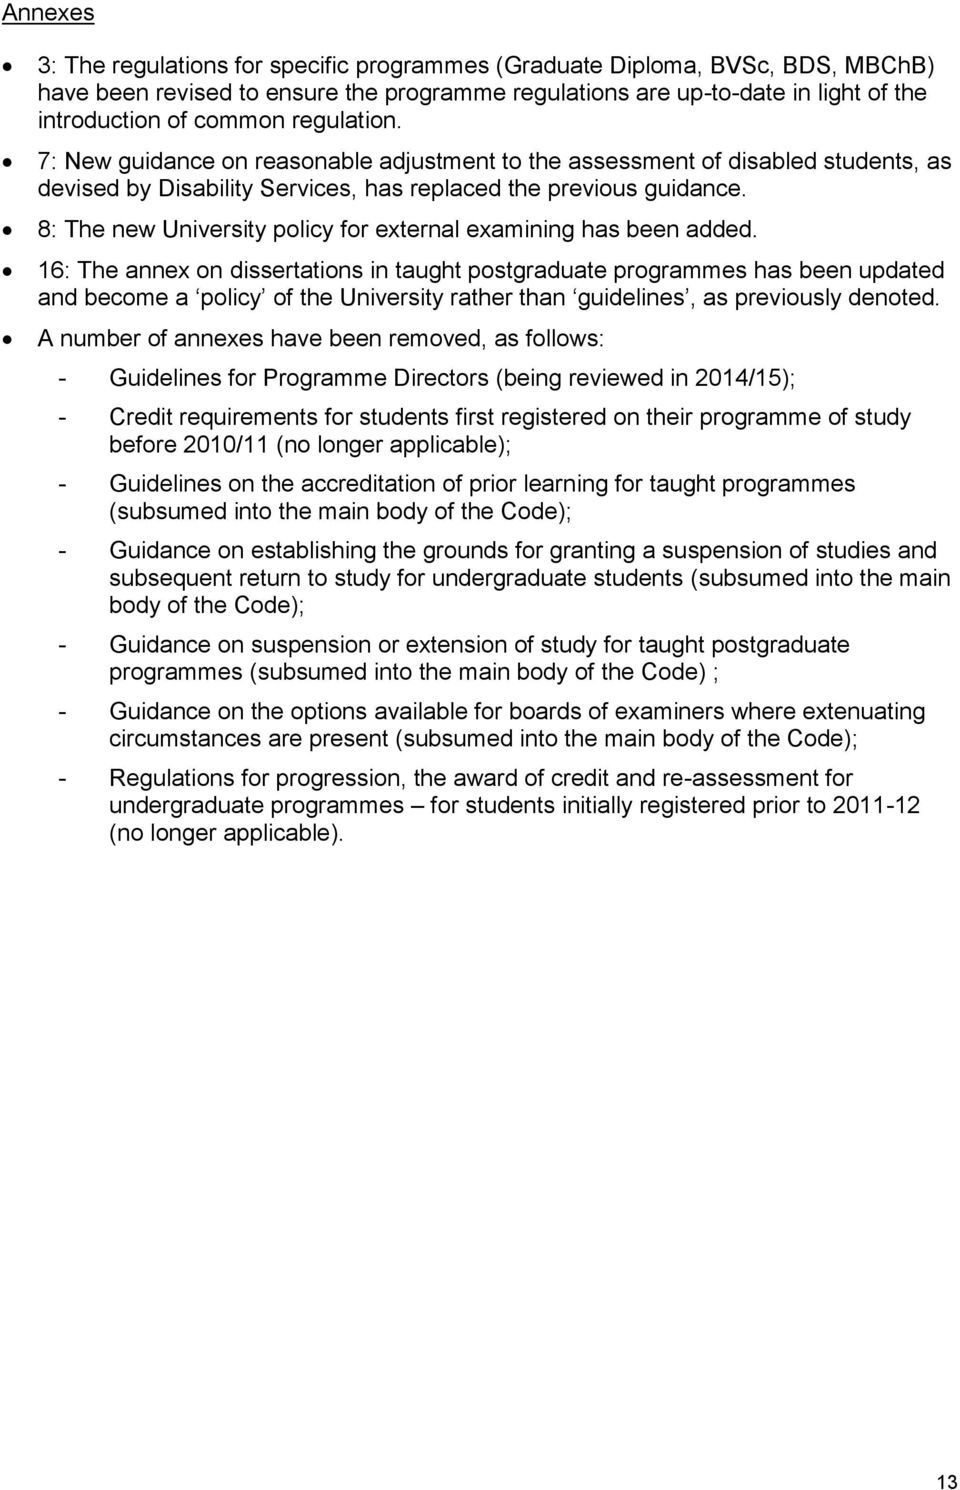 8: The new University policy for external examining has been added.